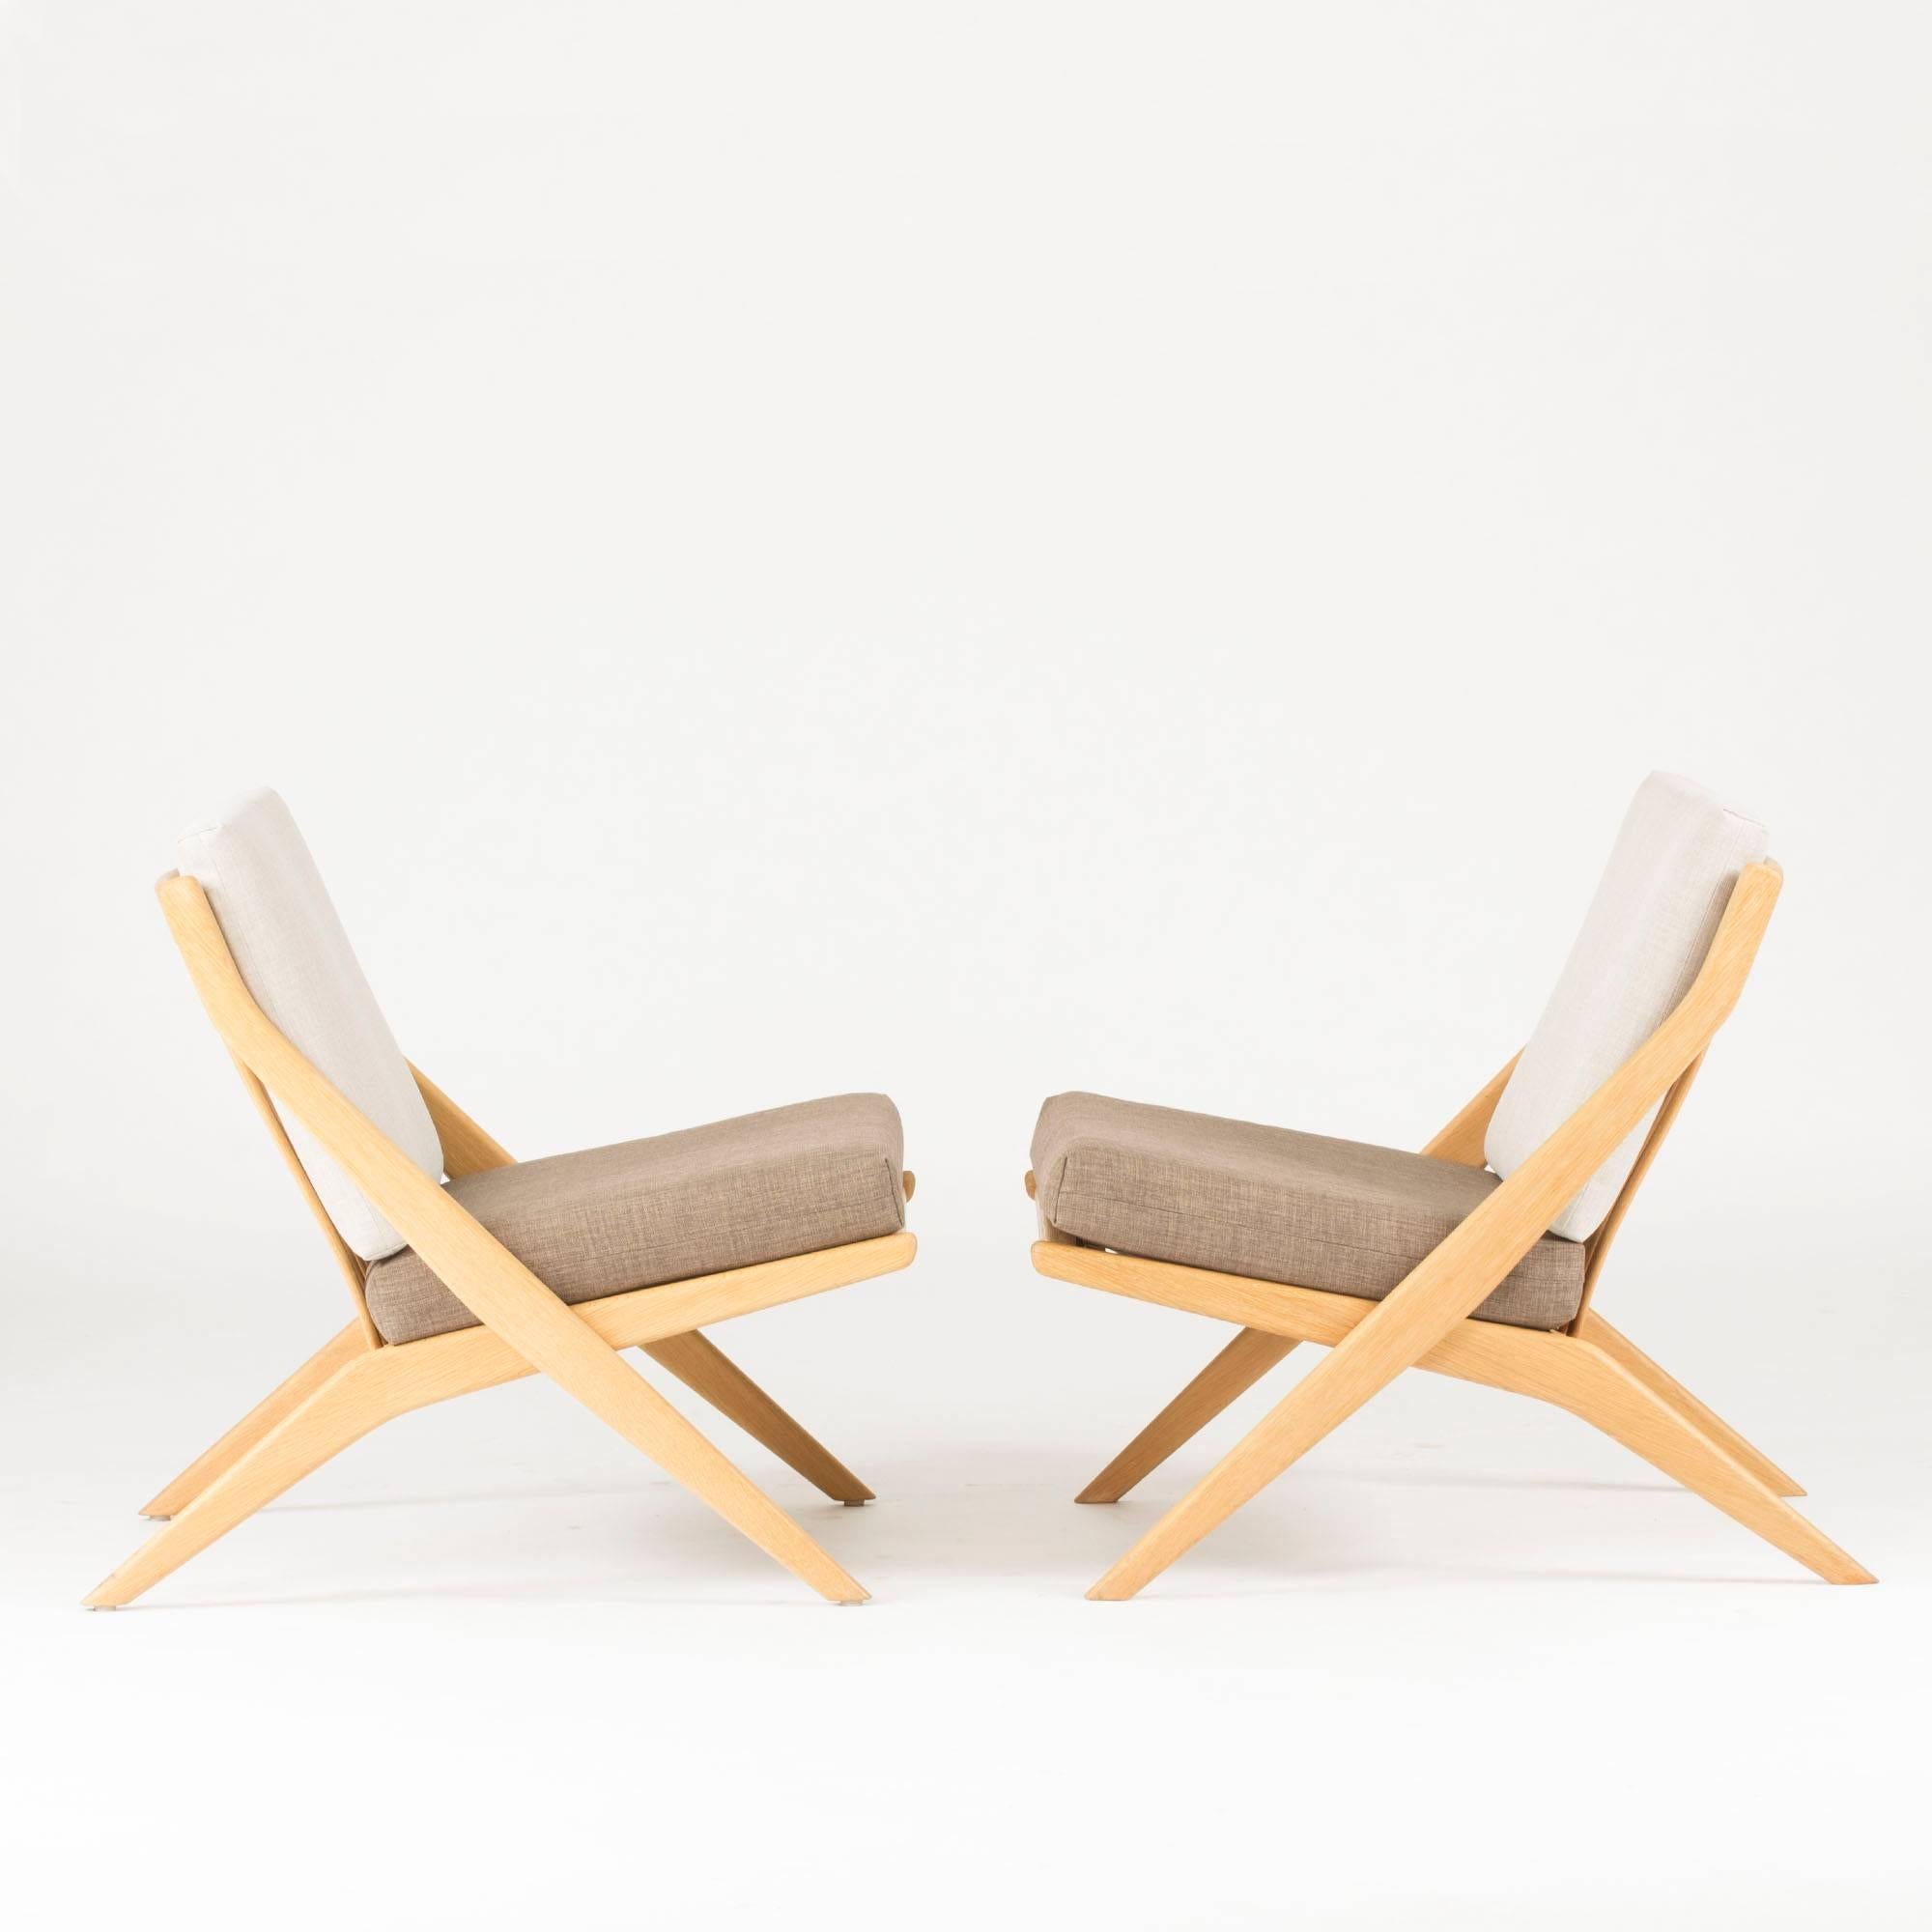 Pair of lounge chairs by Folke Ohlsson for Bodafors, made from oak with removable cushions. Casual, comfortable elegance beautifully executed.